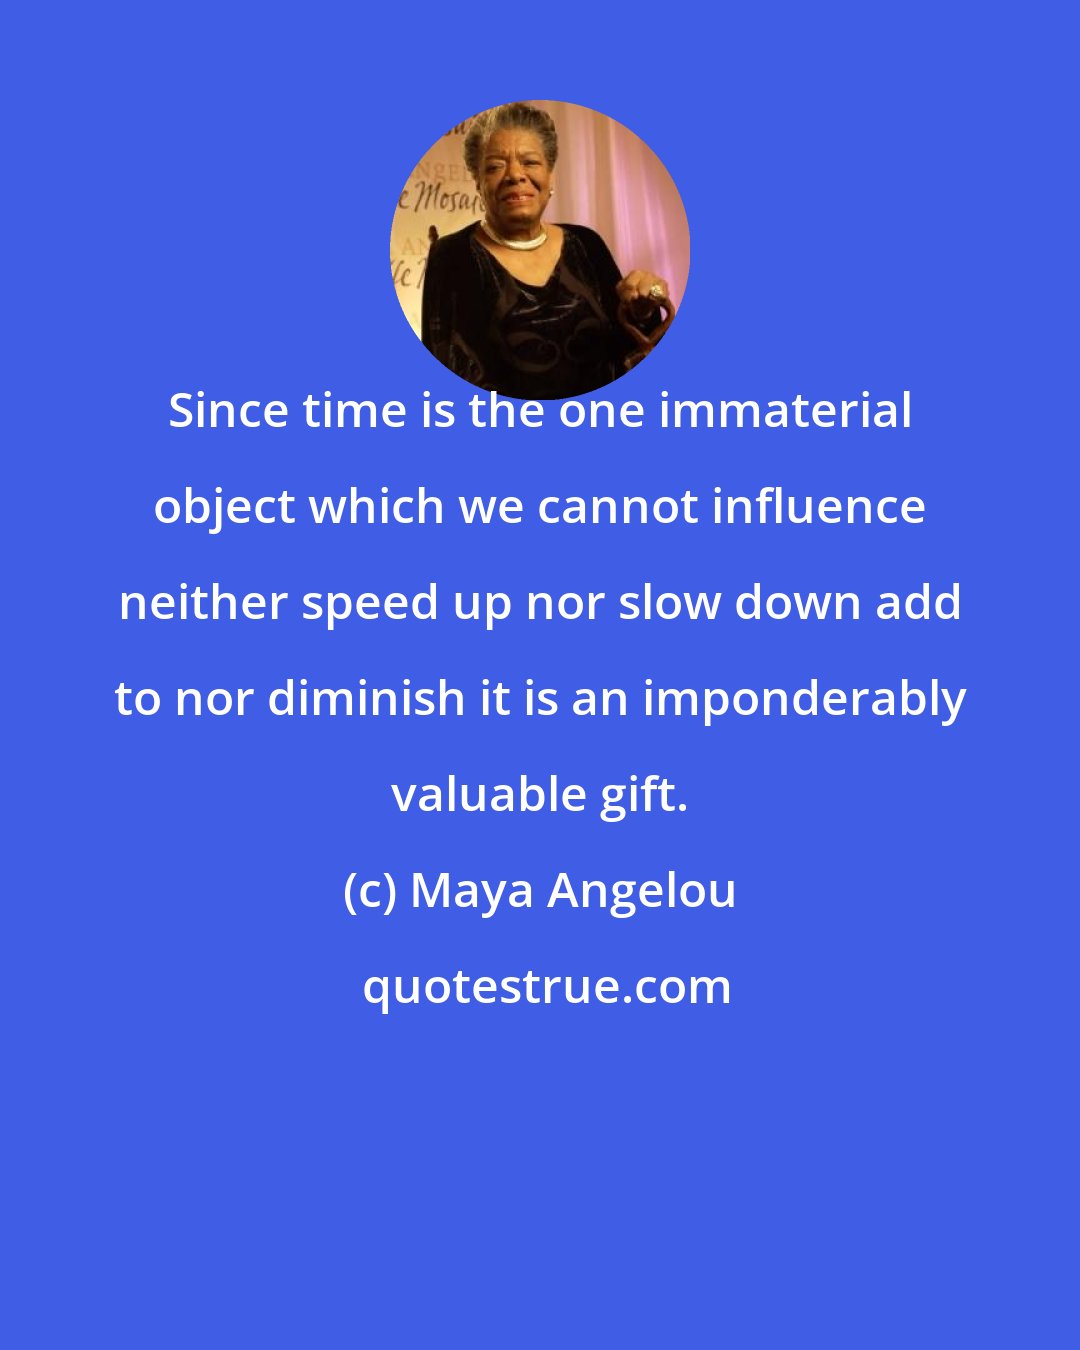 Maya Angelou: Since time is the one immaterial object which we cannot influence neither speed up nor slow down add to nor diminish it is an imponderably valuable gift.